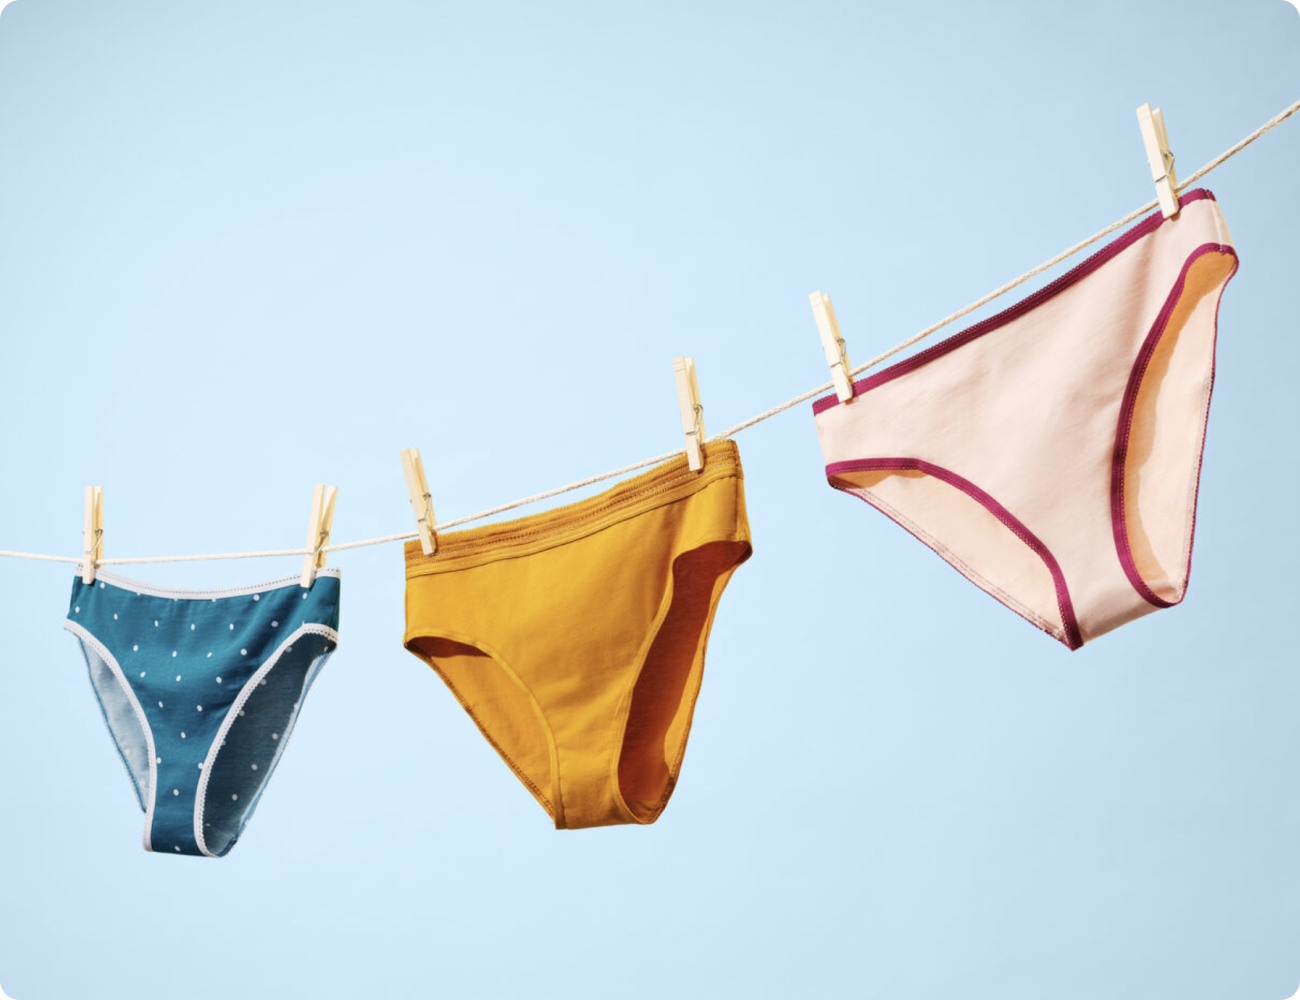 How Should Women's Underwear Fit? Tip: Sizing, Cut & Fabric Matter – Parade